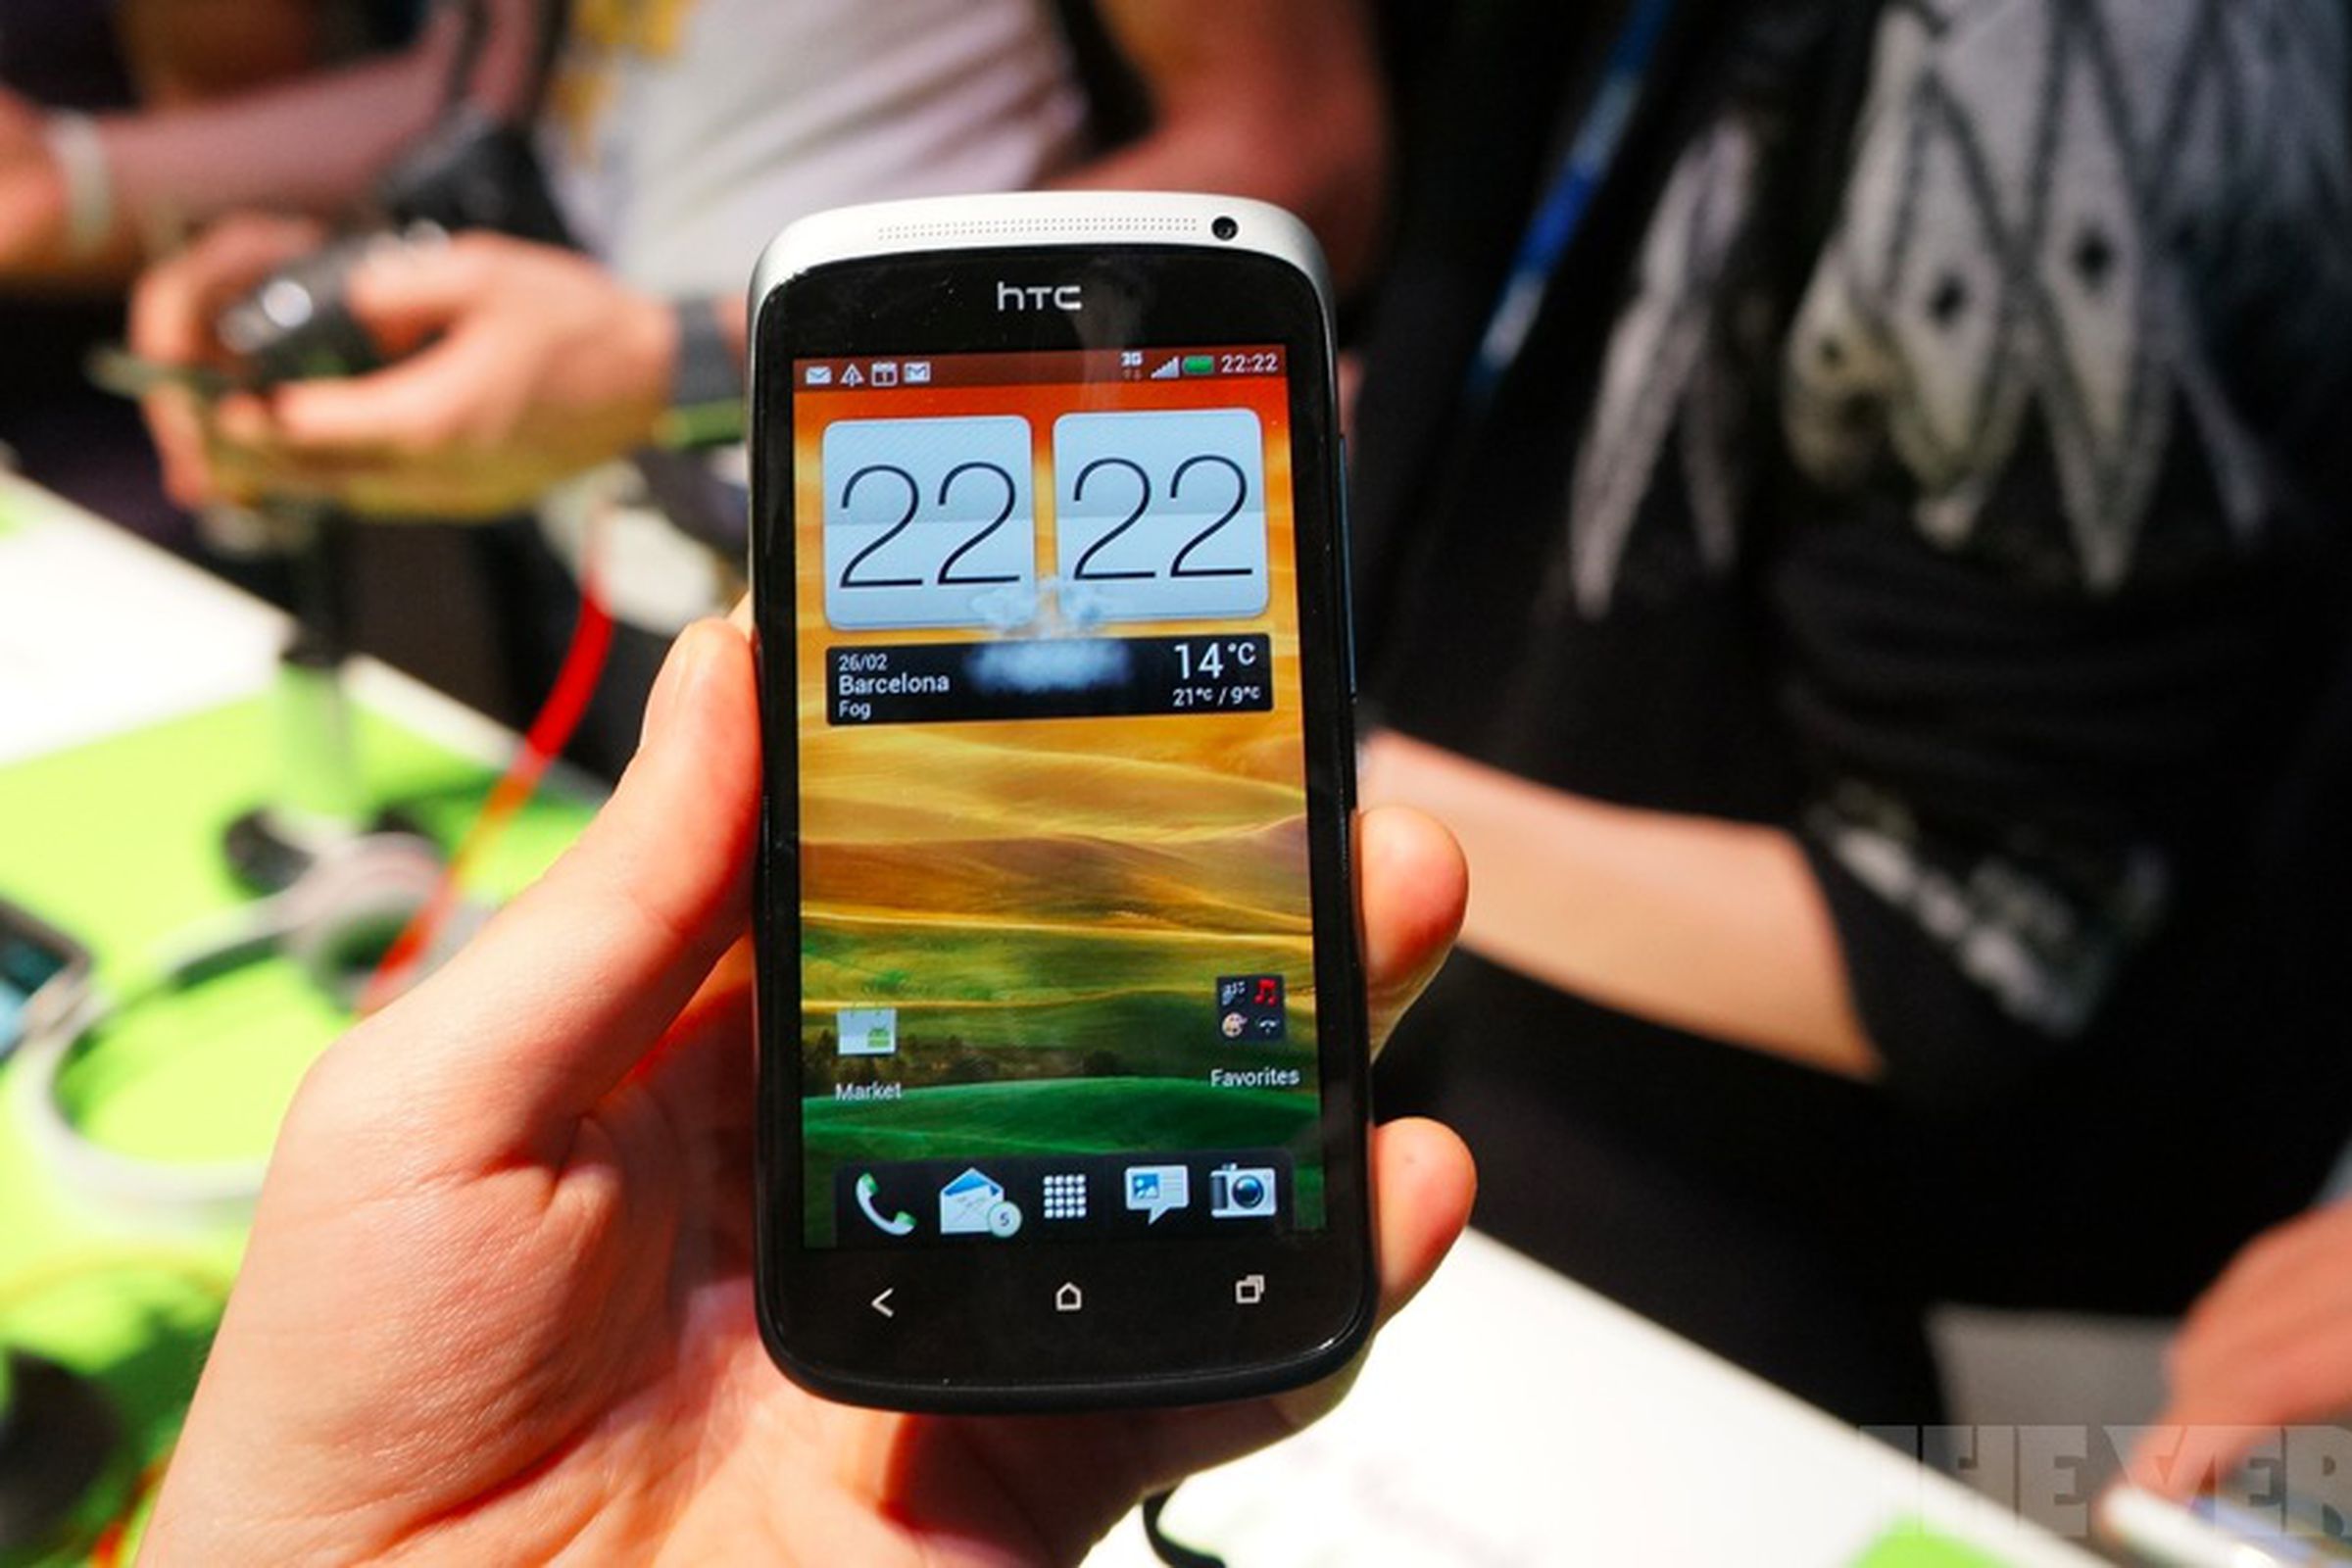 Gallery Photo: HTC One S hands-on photos